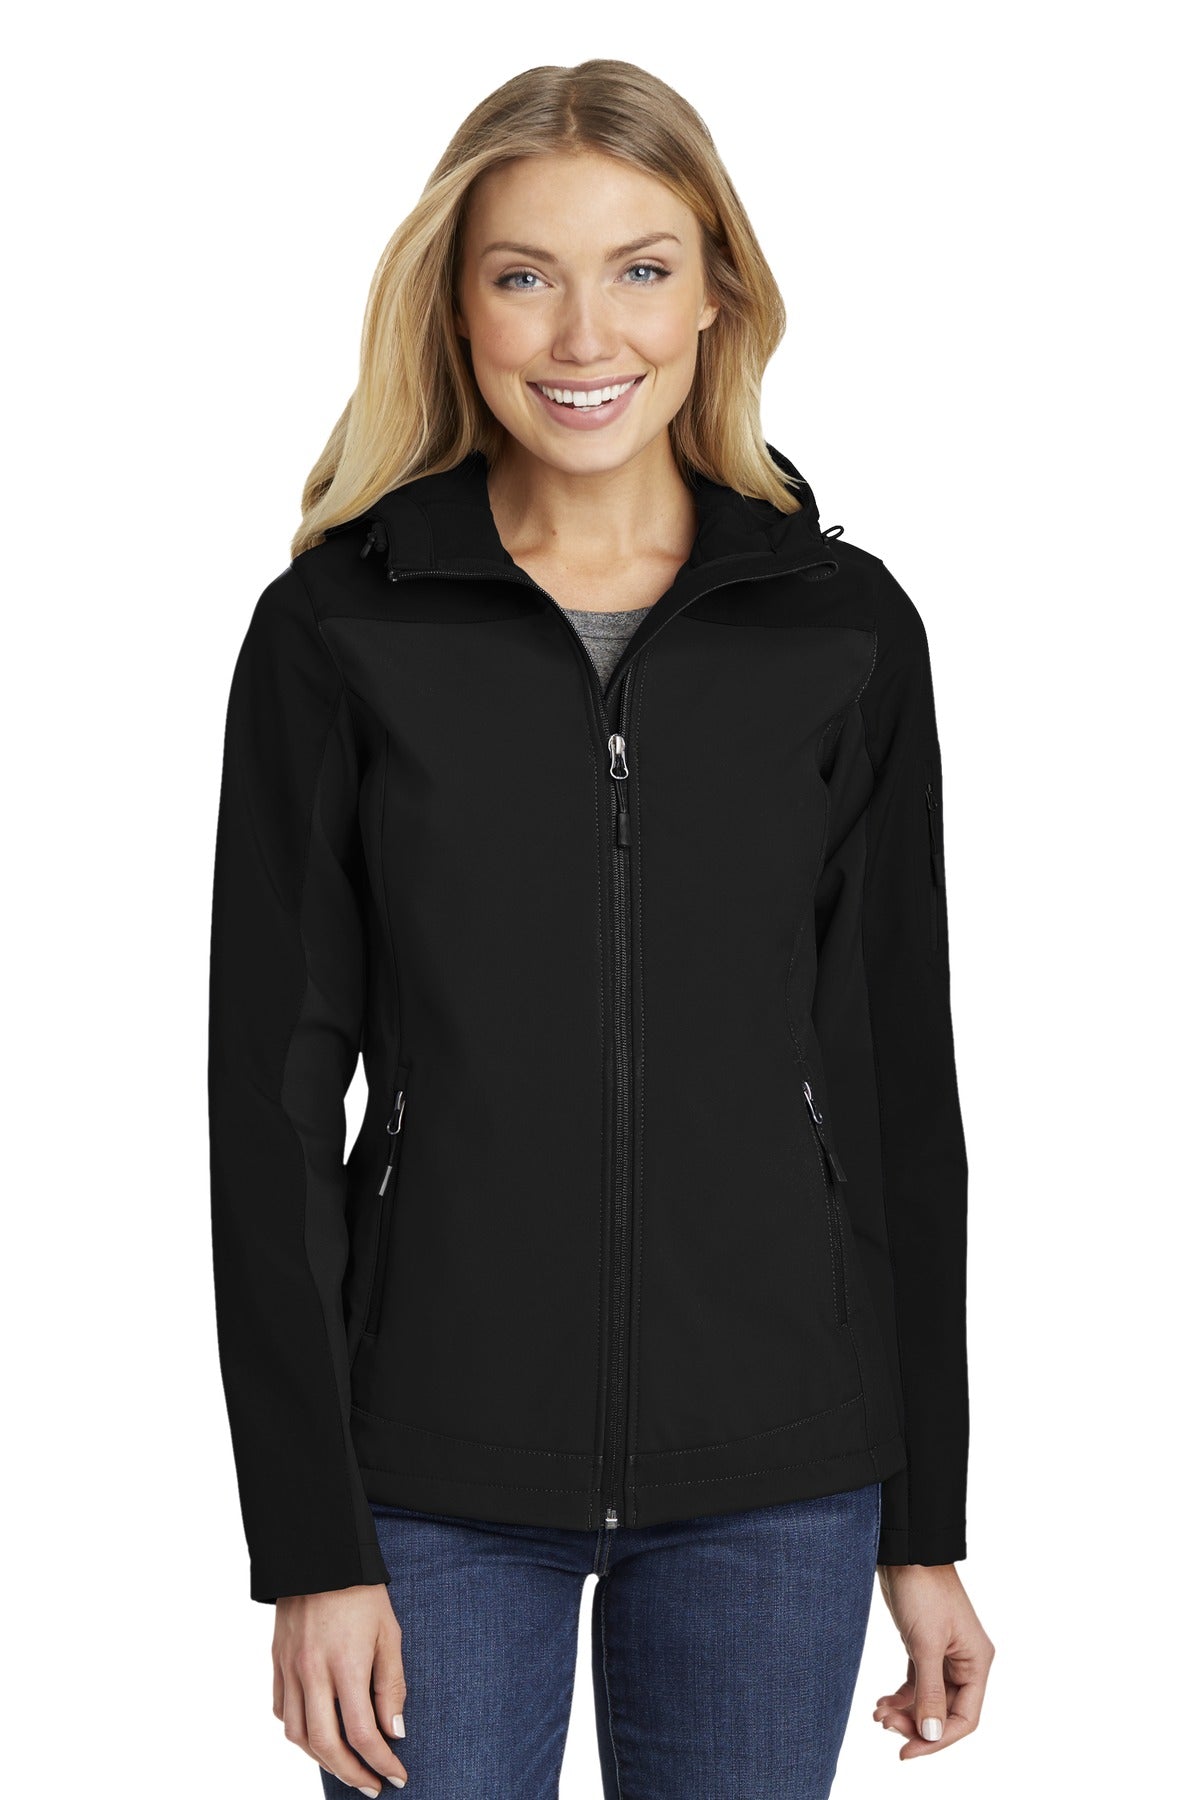 Port Authority® Ladies Hooded Core Soft Shell Jacket. L335 - DFW Impression